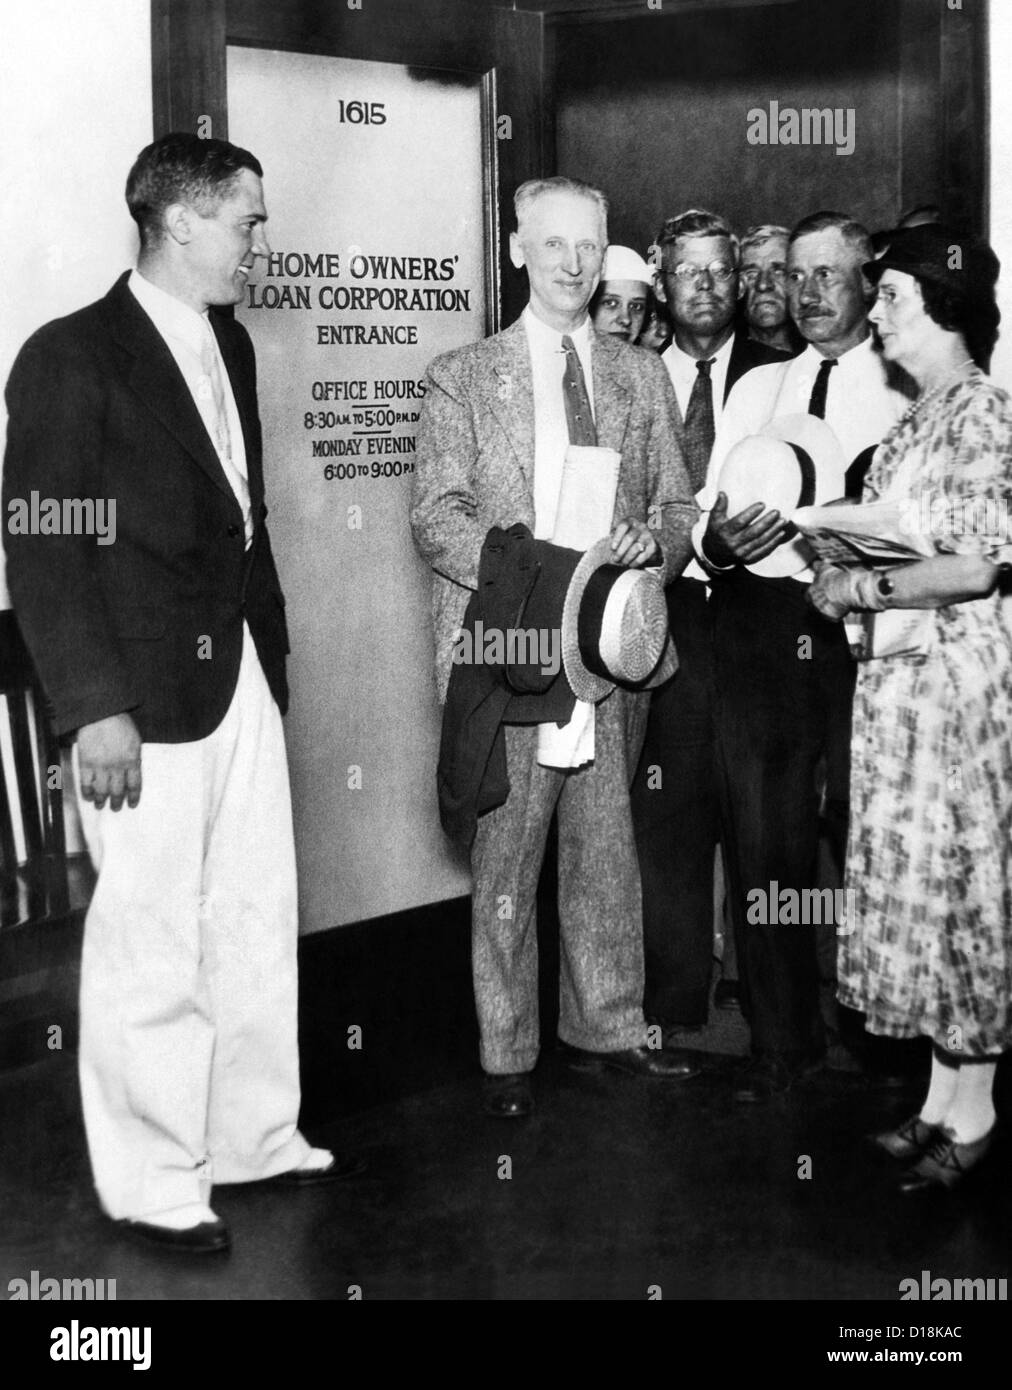 First Federal Home Owners Loan Corporation office (HOLC) opens. HOLC was a New Deal agency established in 1933 under President Stock Photo